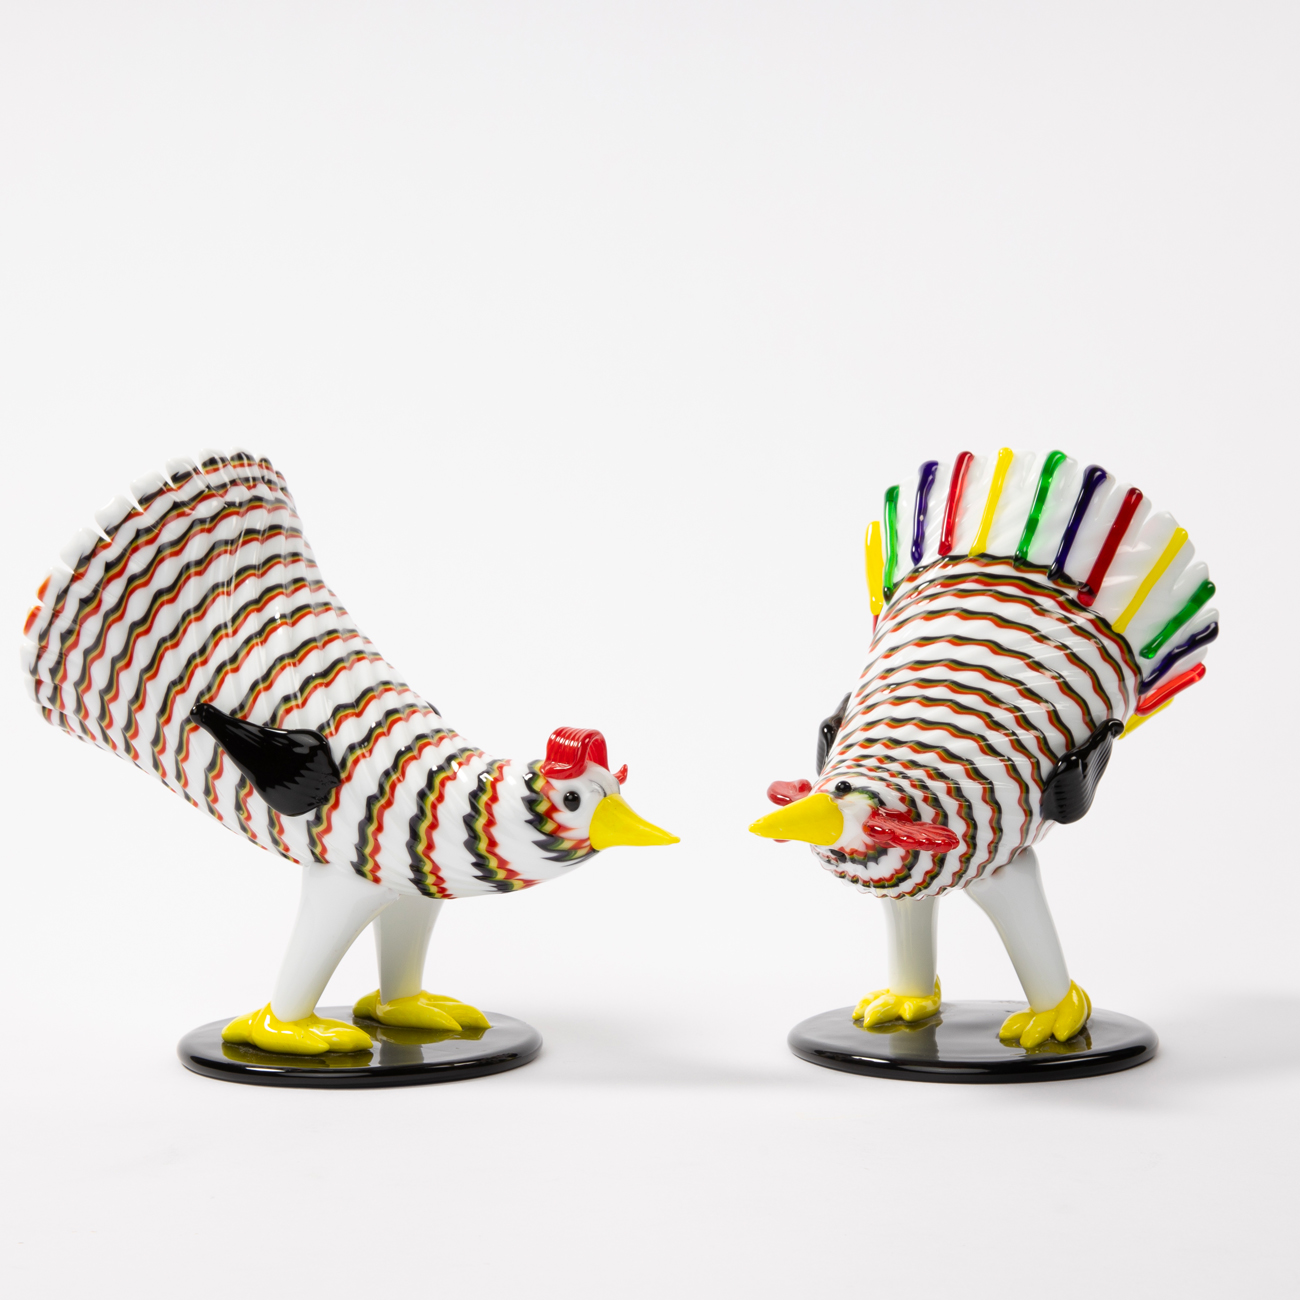 Matching pair of a rooster and hen by Fulvio Bianconi - img04